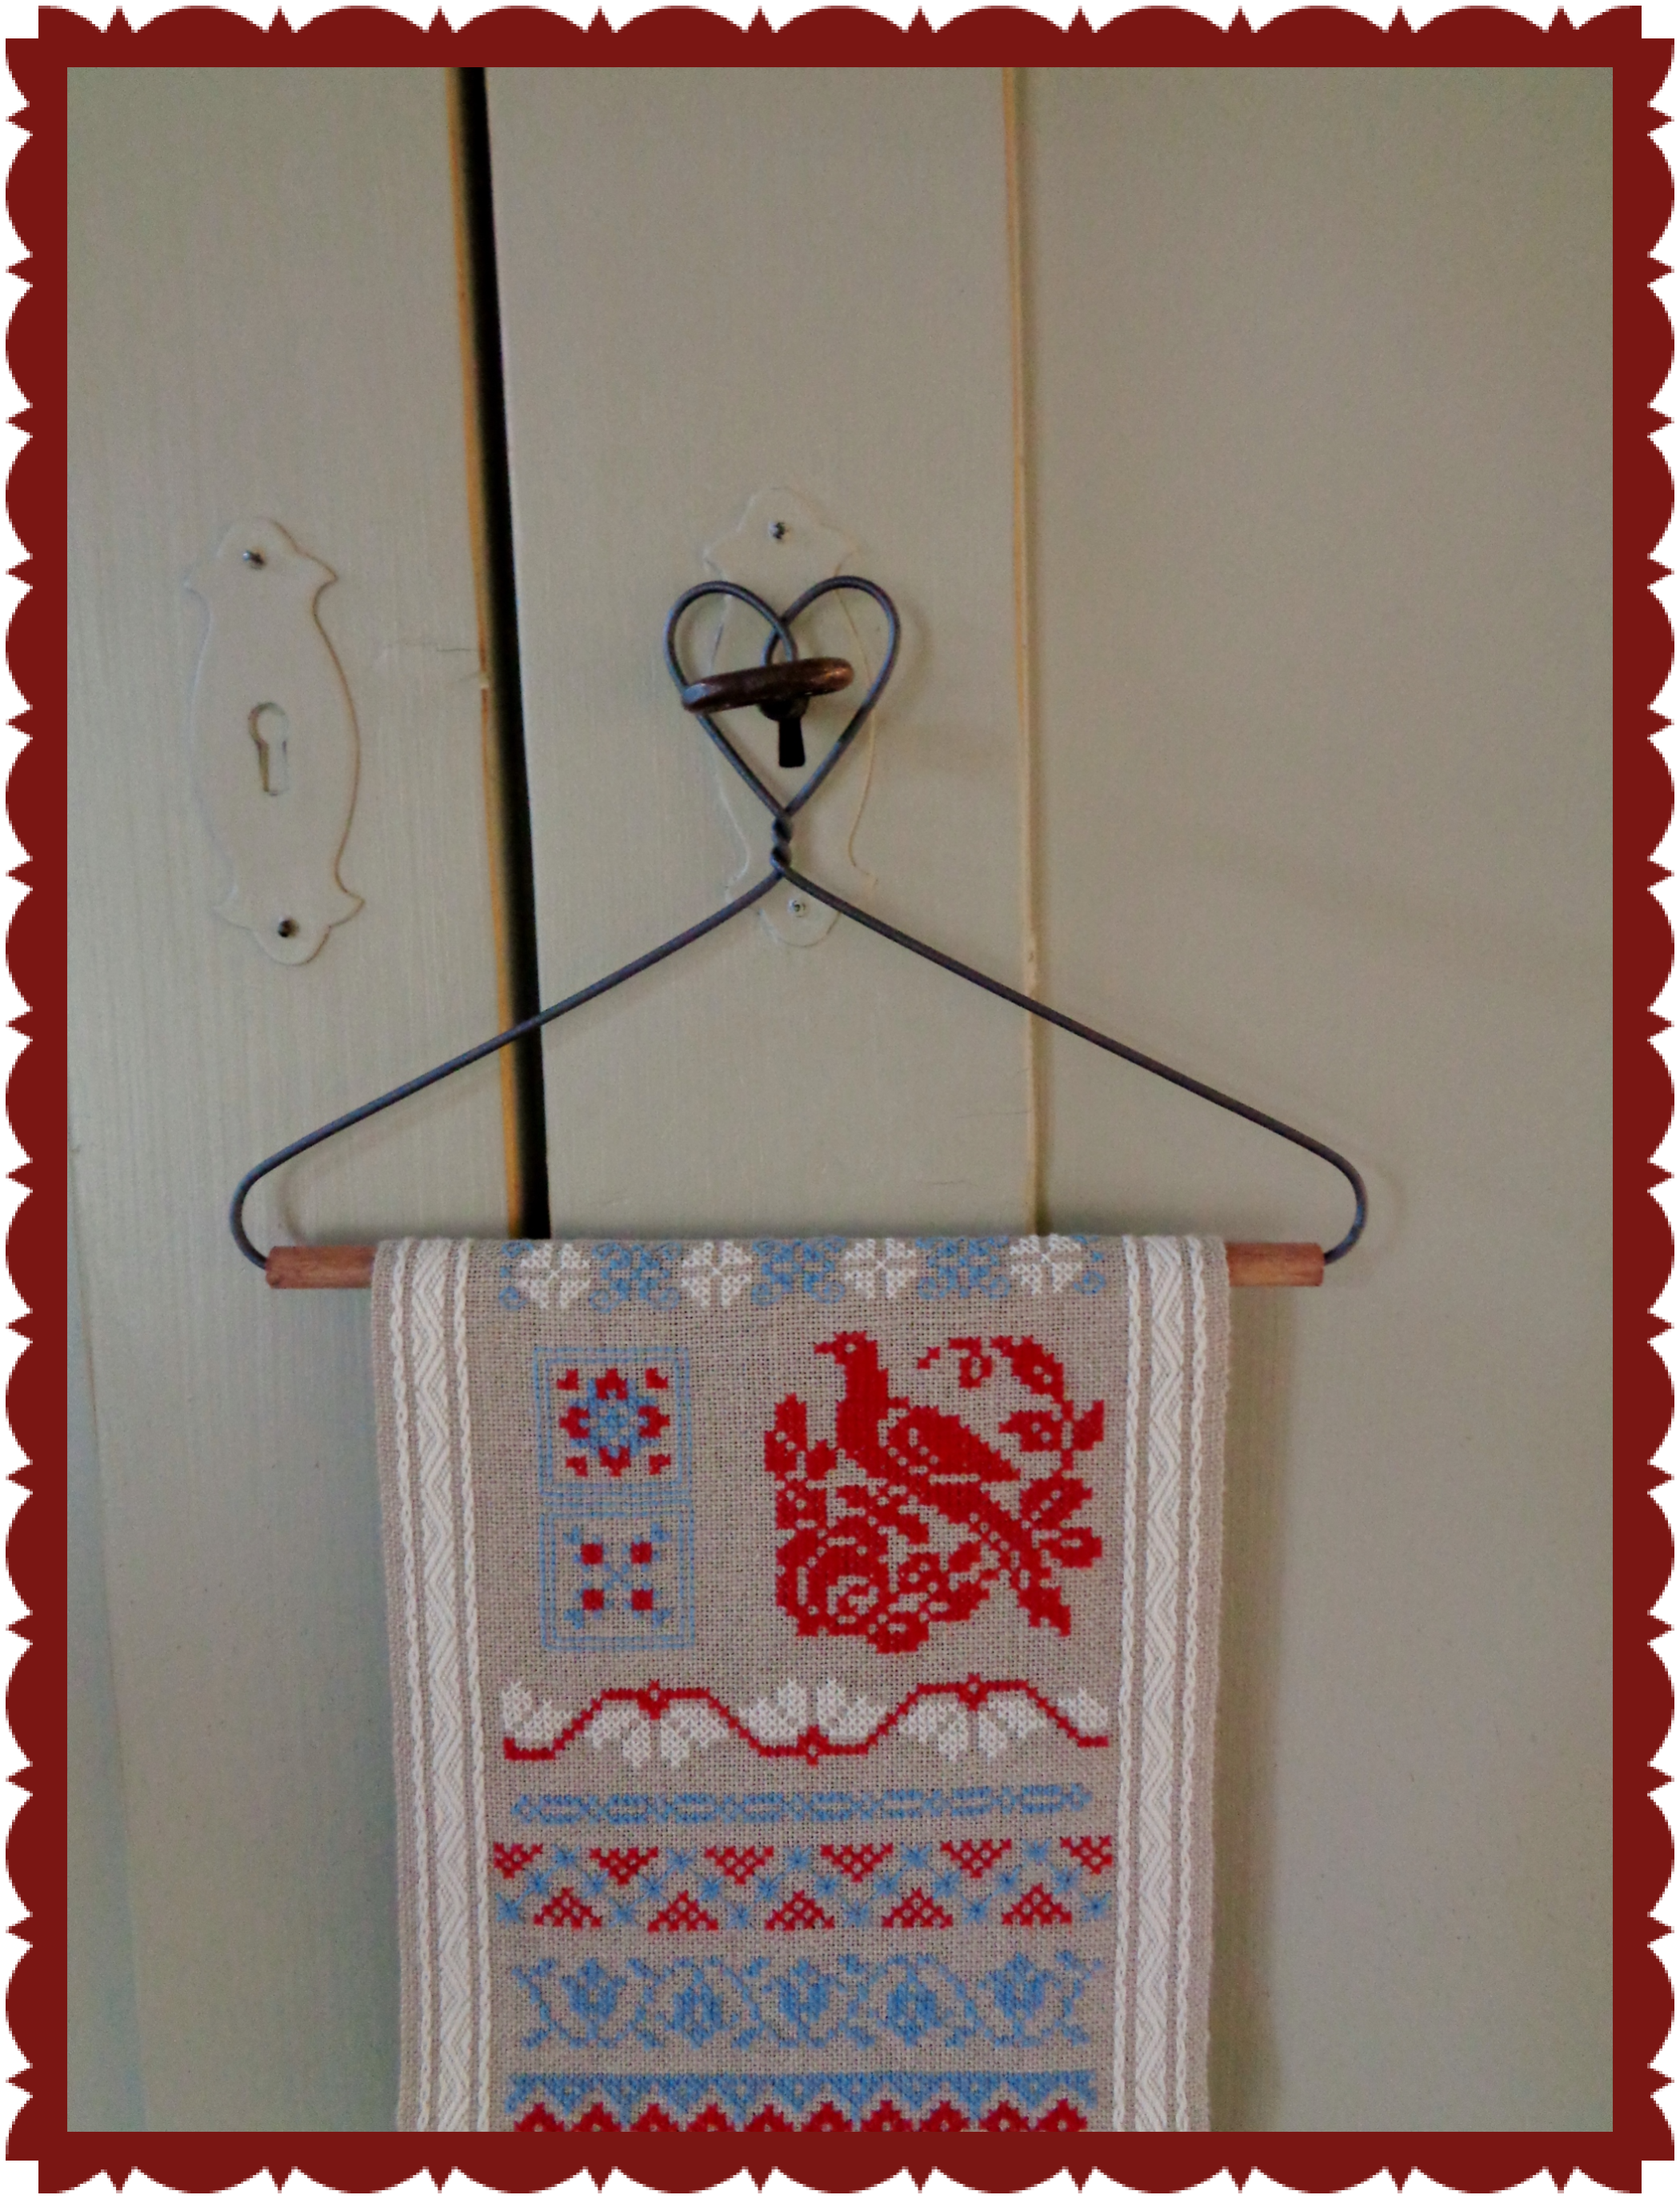 <tc>Cute heart-shaped hanging system for embroidery banding 170 mm wide.</tc>